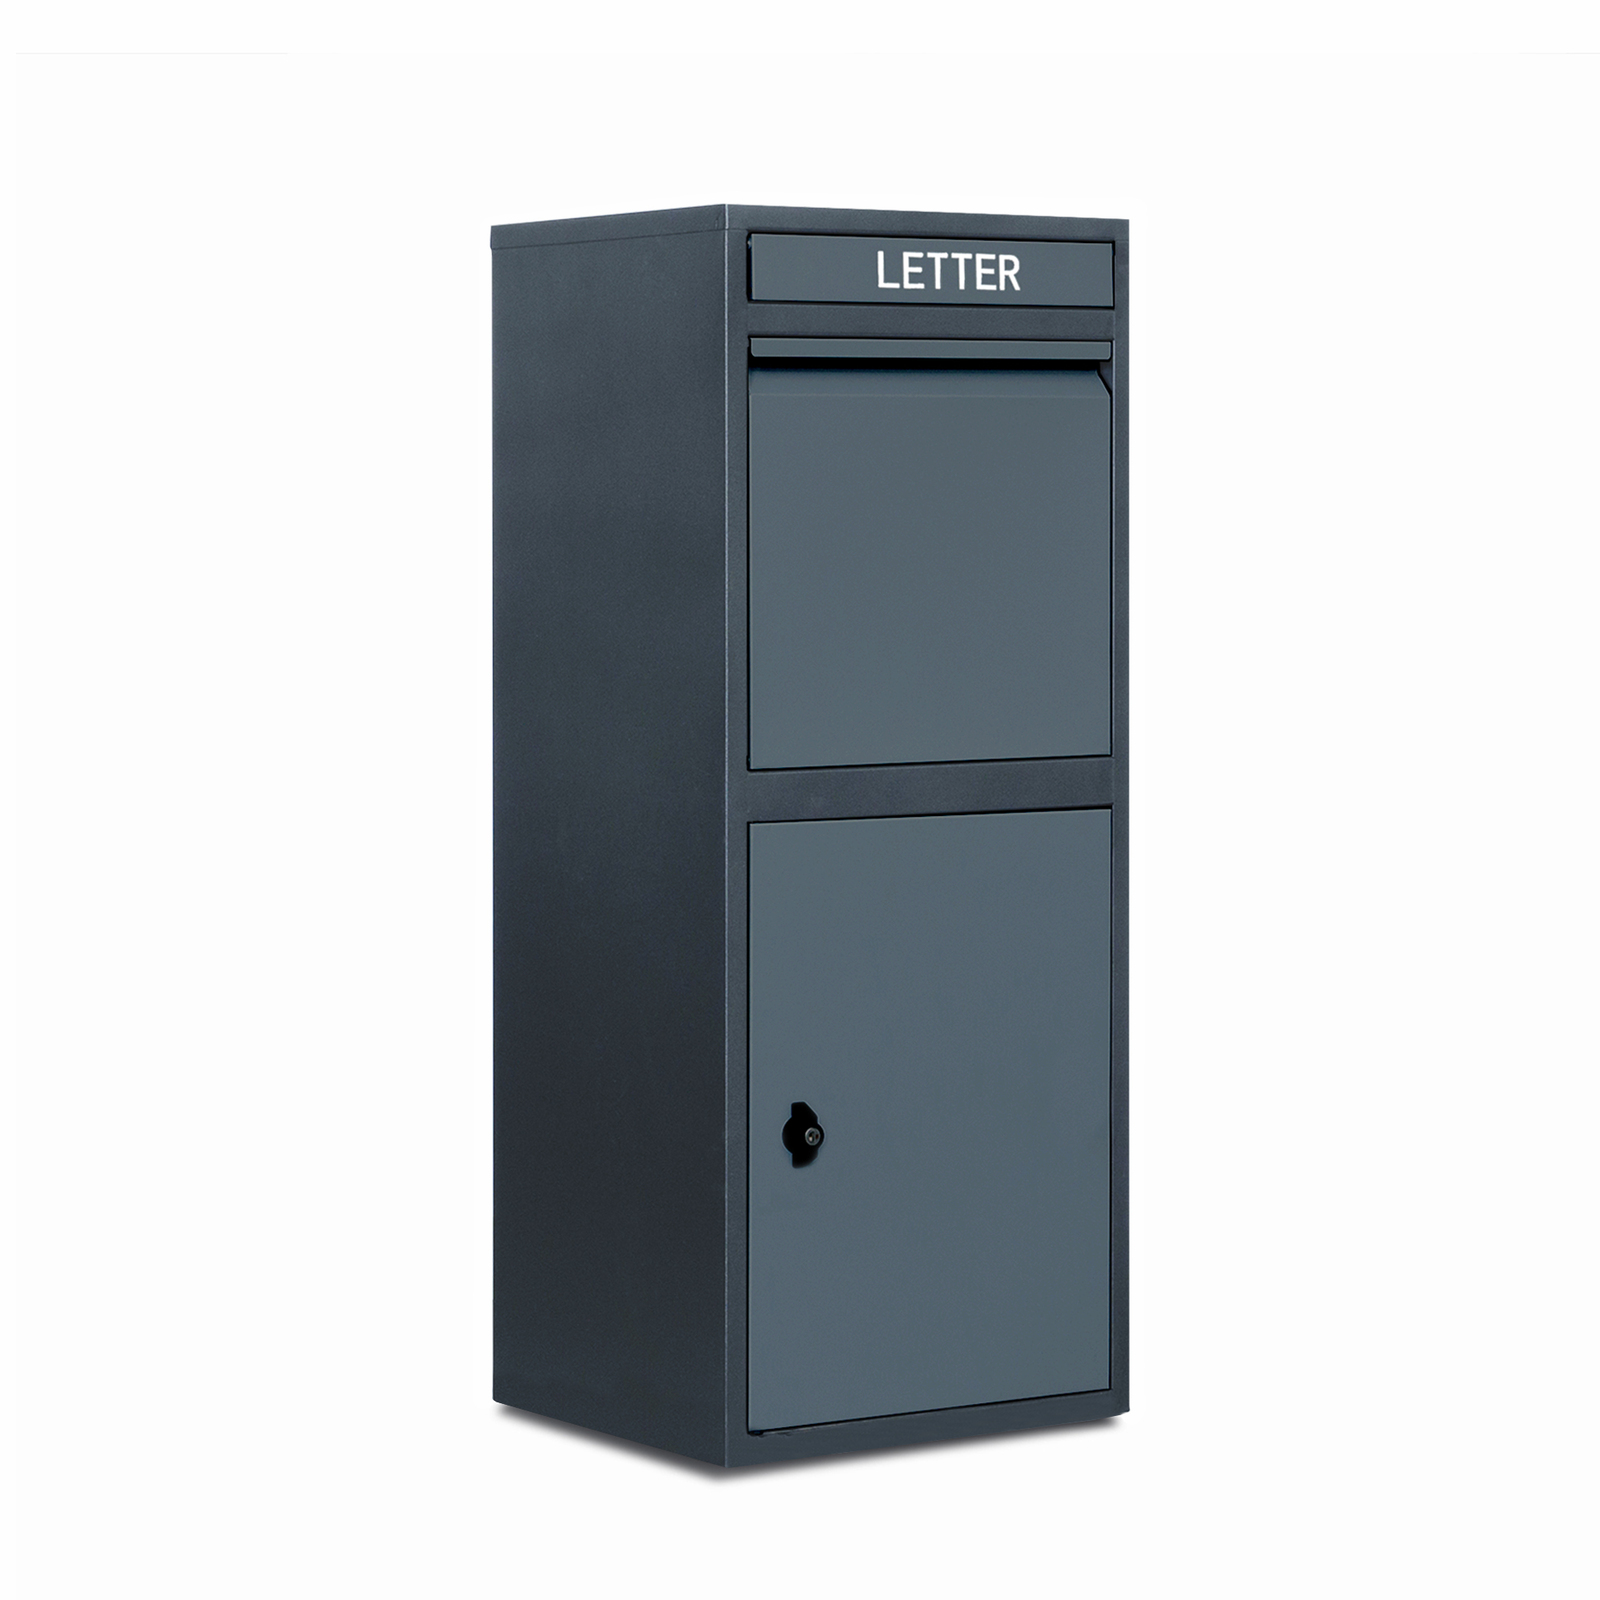 New Improved Steel Post Parcel Box Package Delivery Mail Box Locking Safe Drop Letterbox Storage Black